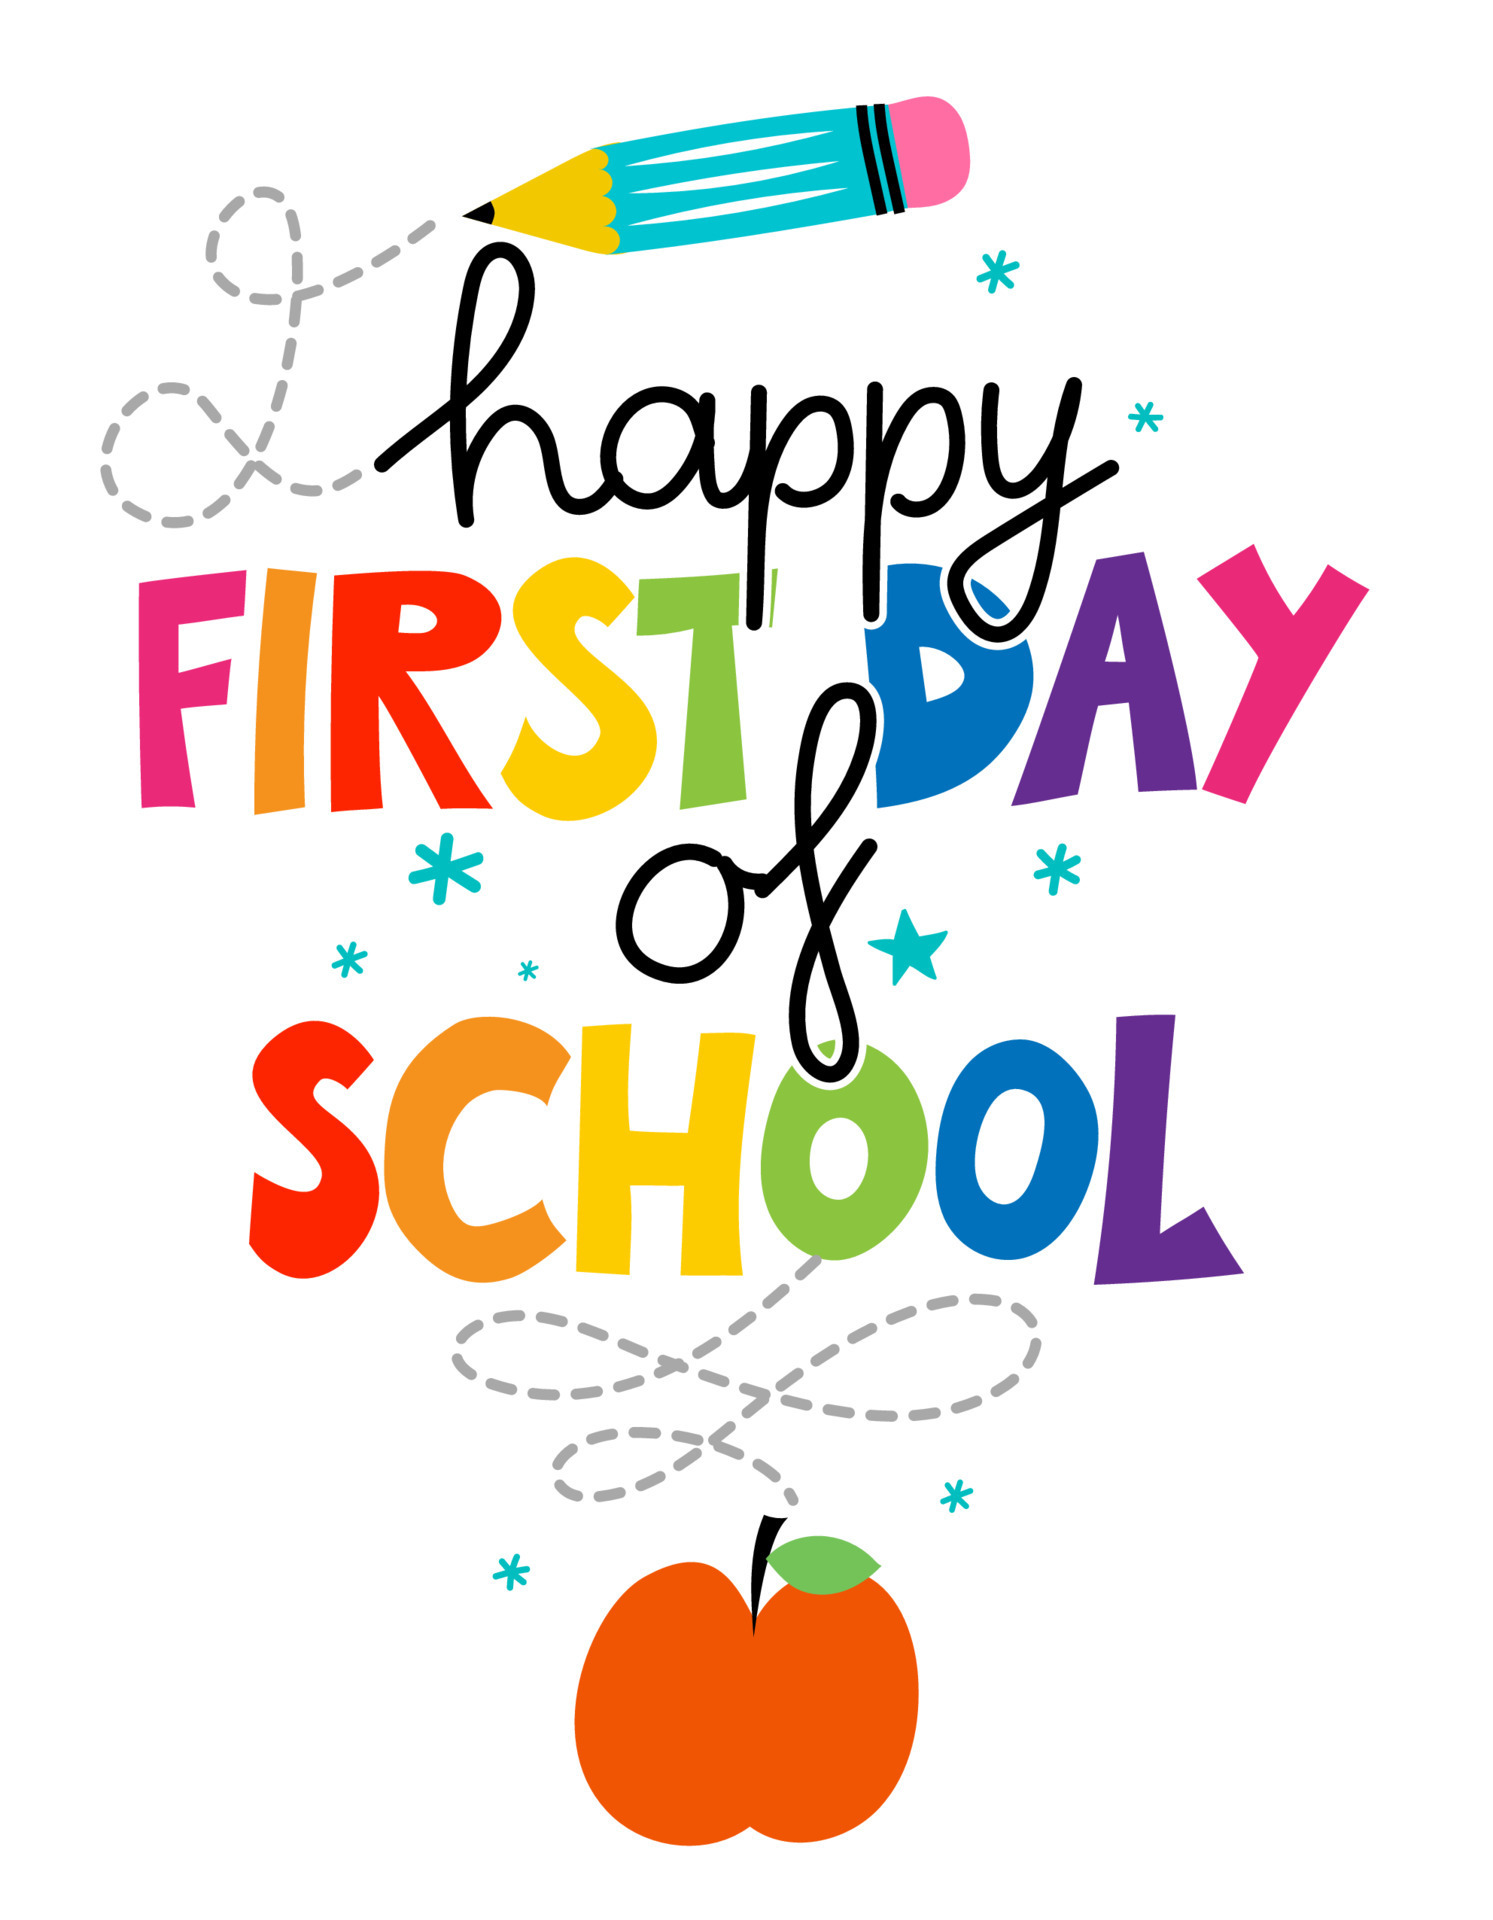 Happy First Day Of School Typography Design Good For Clothes Gift Sets Photos Or Motivation Posters Welcome Back To School Sign Vector 